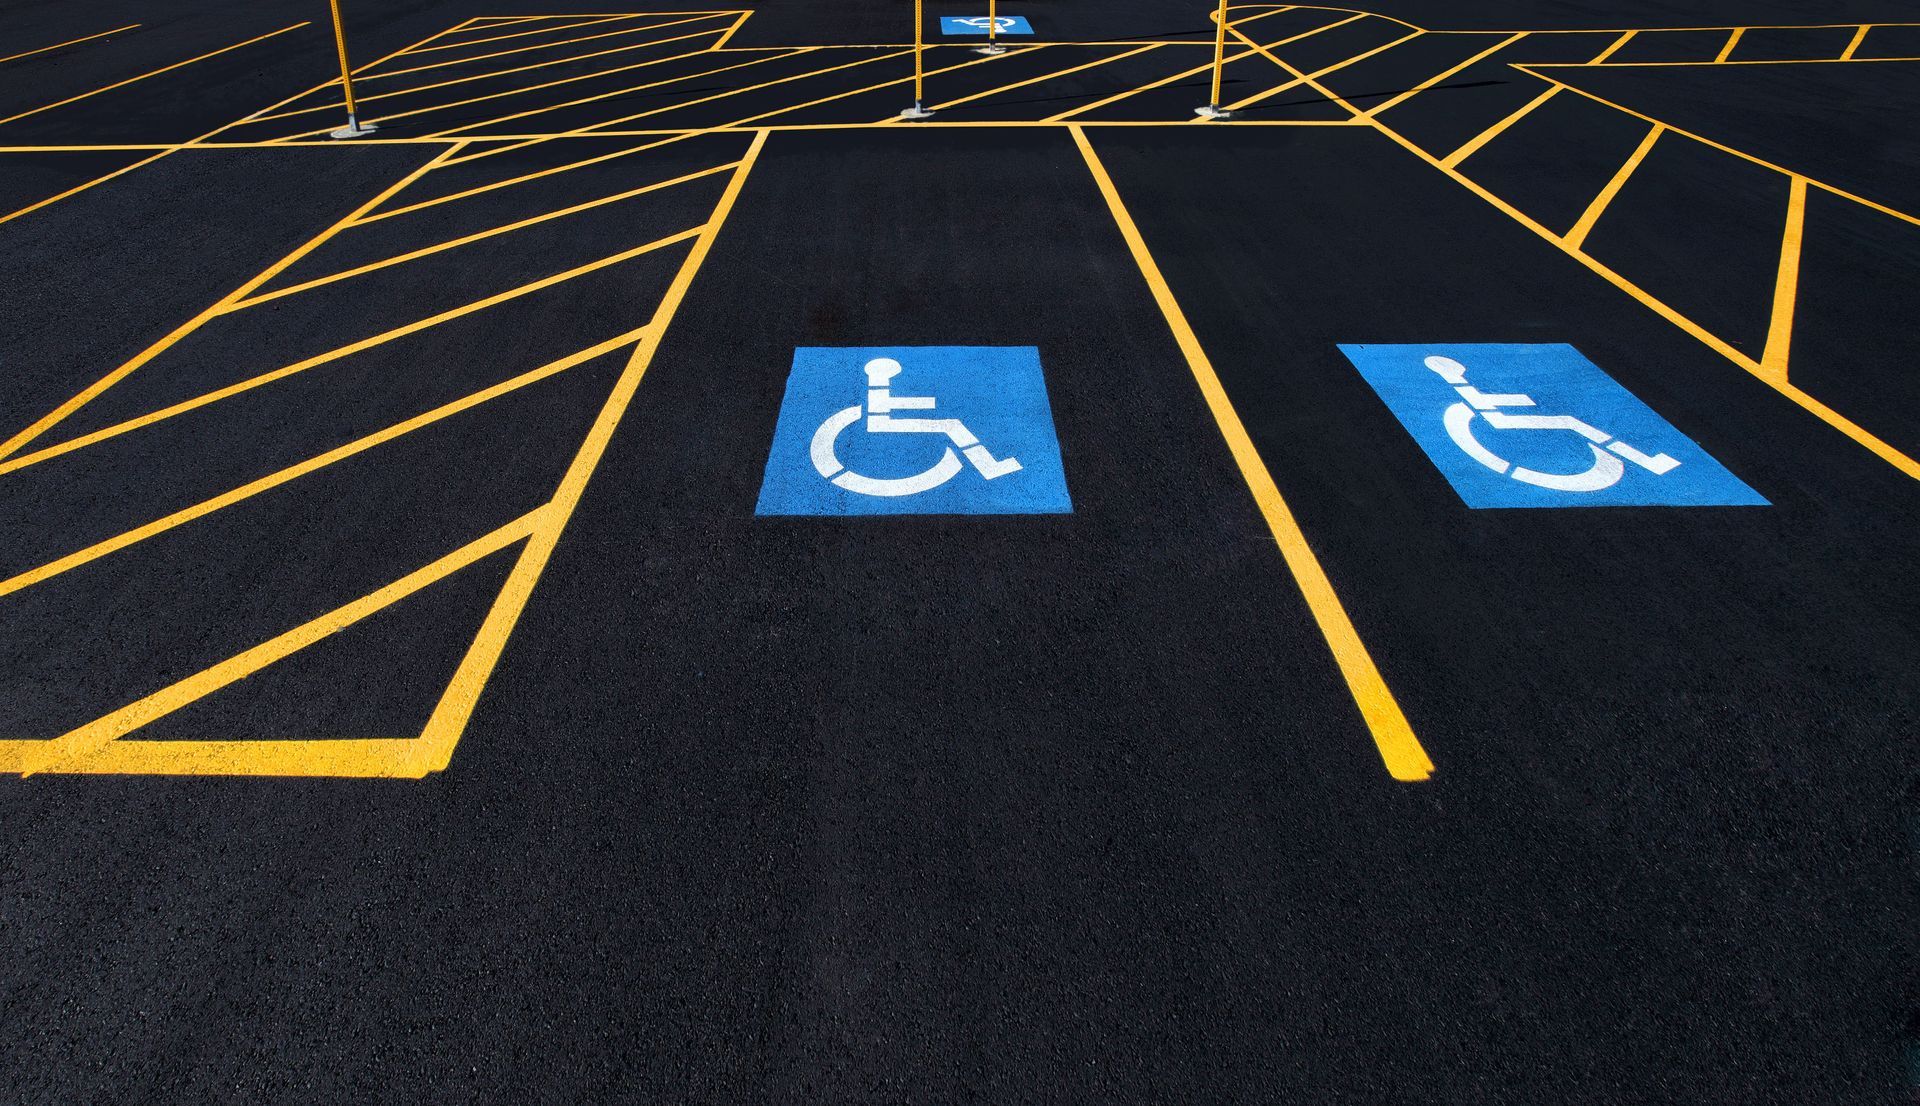 a parking lot with handicap signs painted on the ground